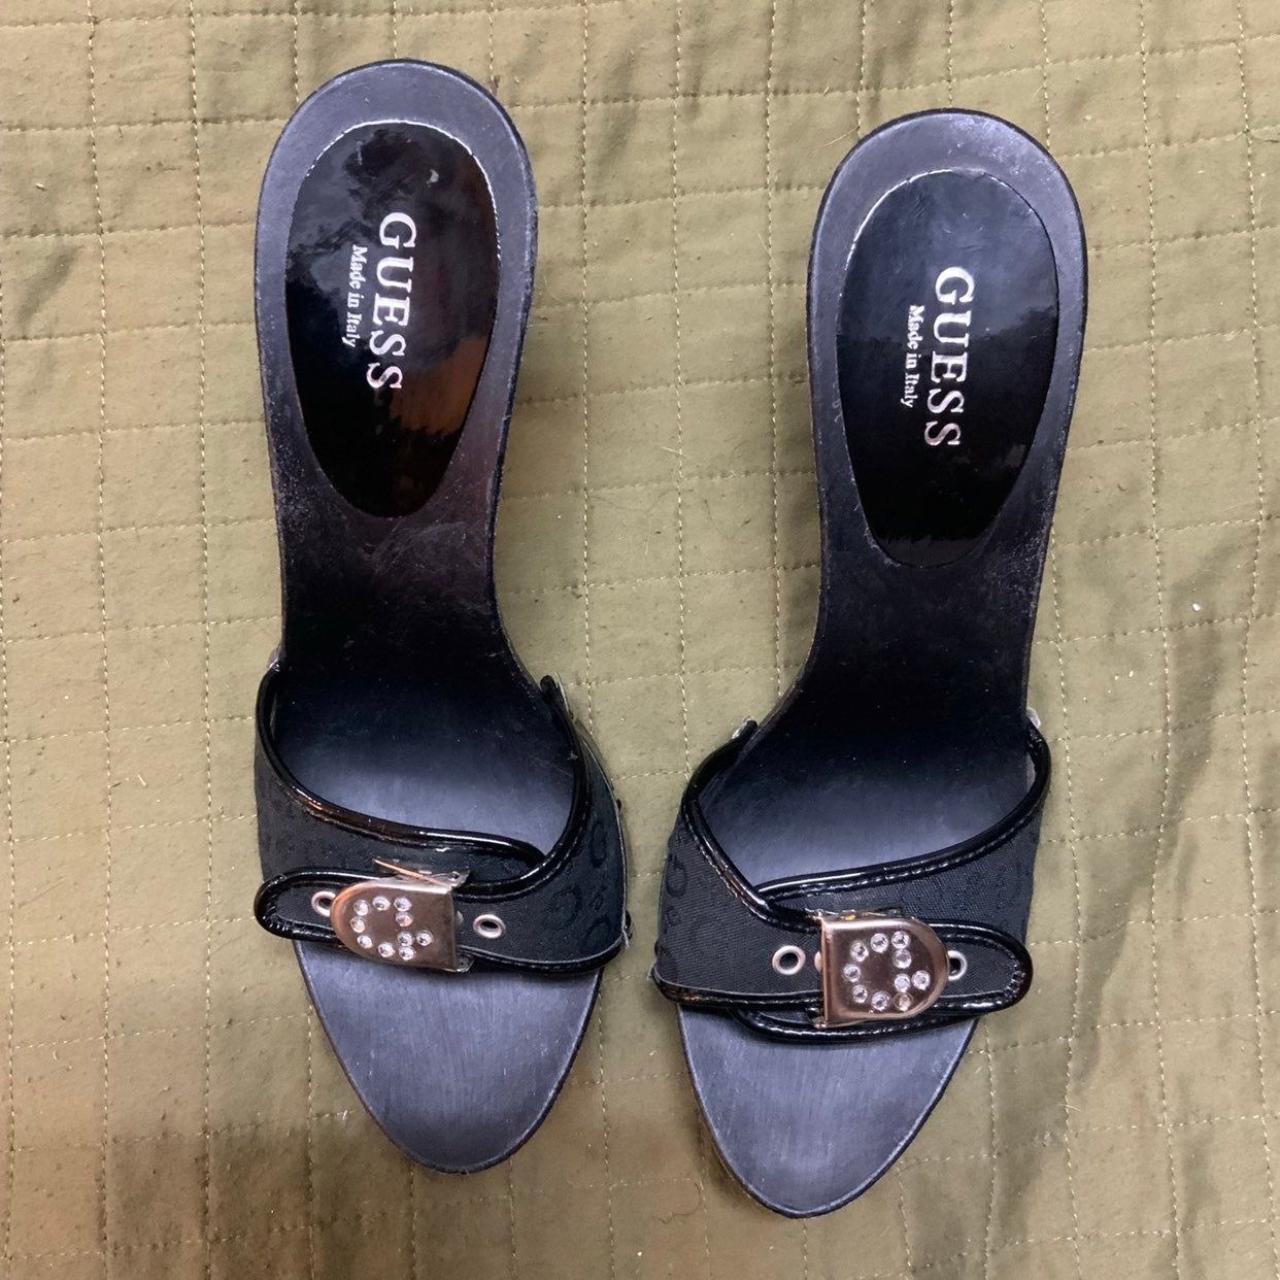 Guess Women's Black and Gold Mules | Depop